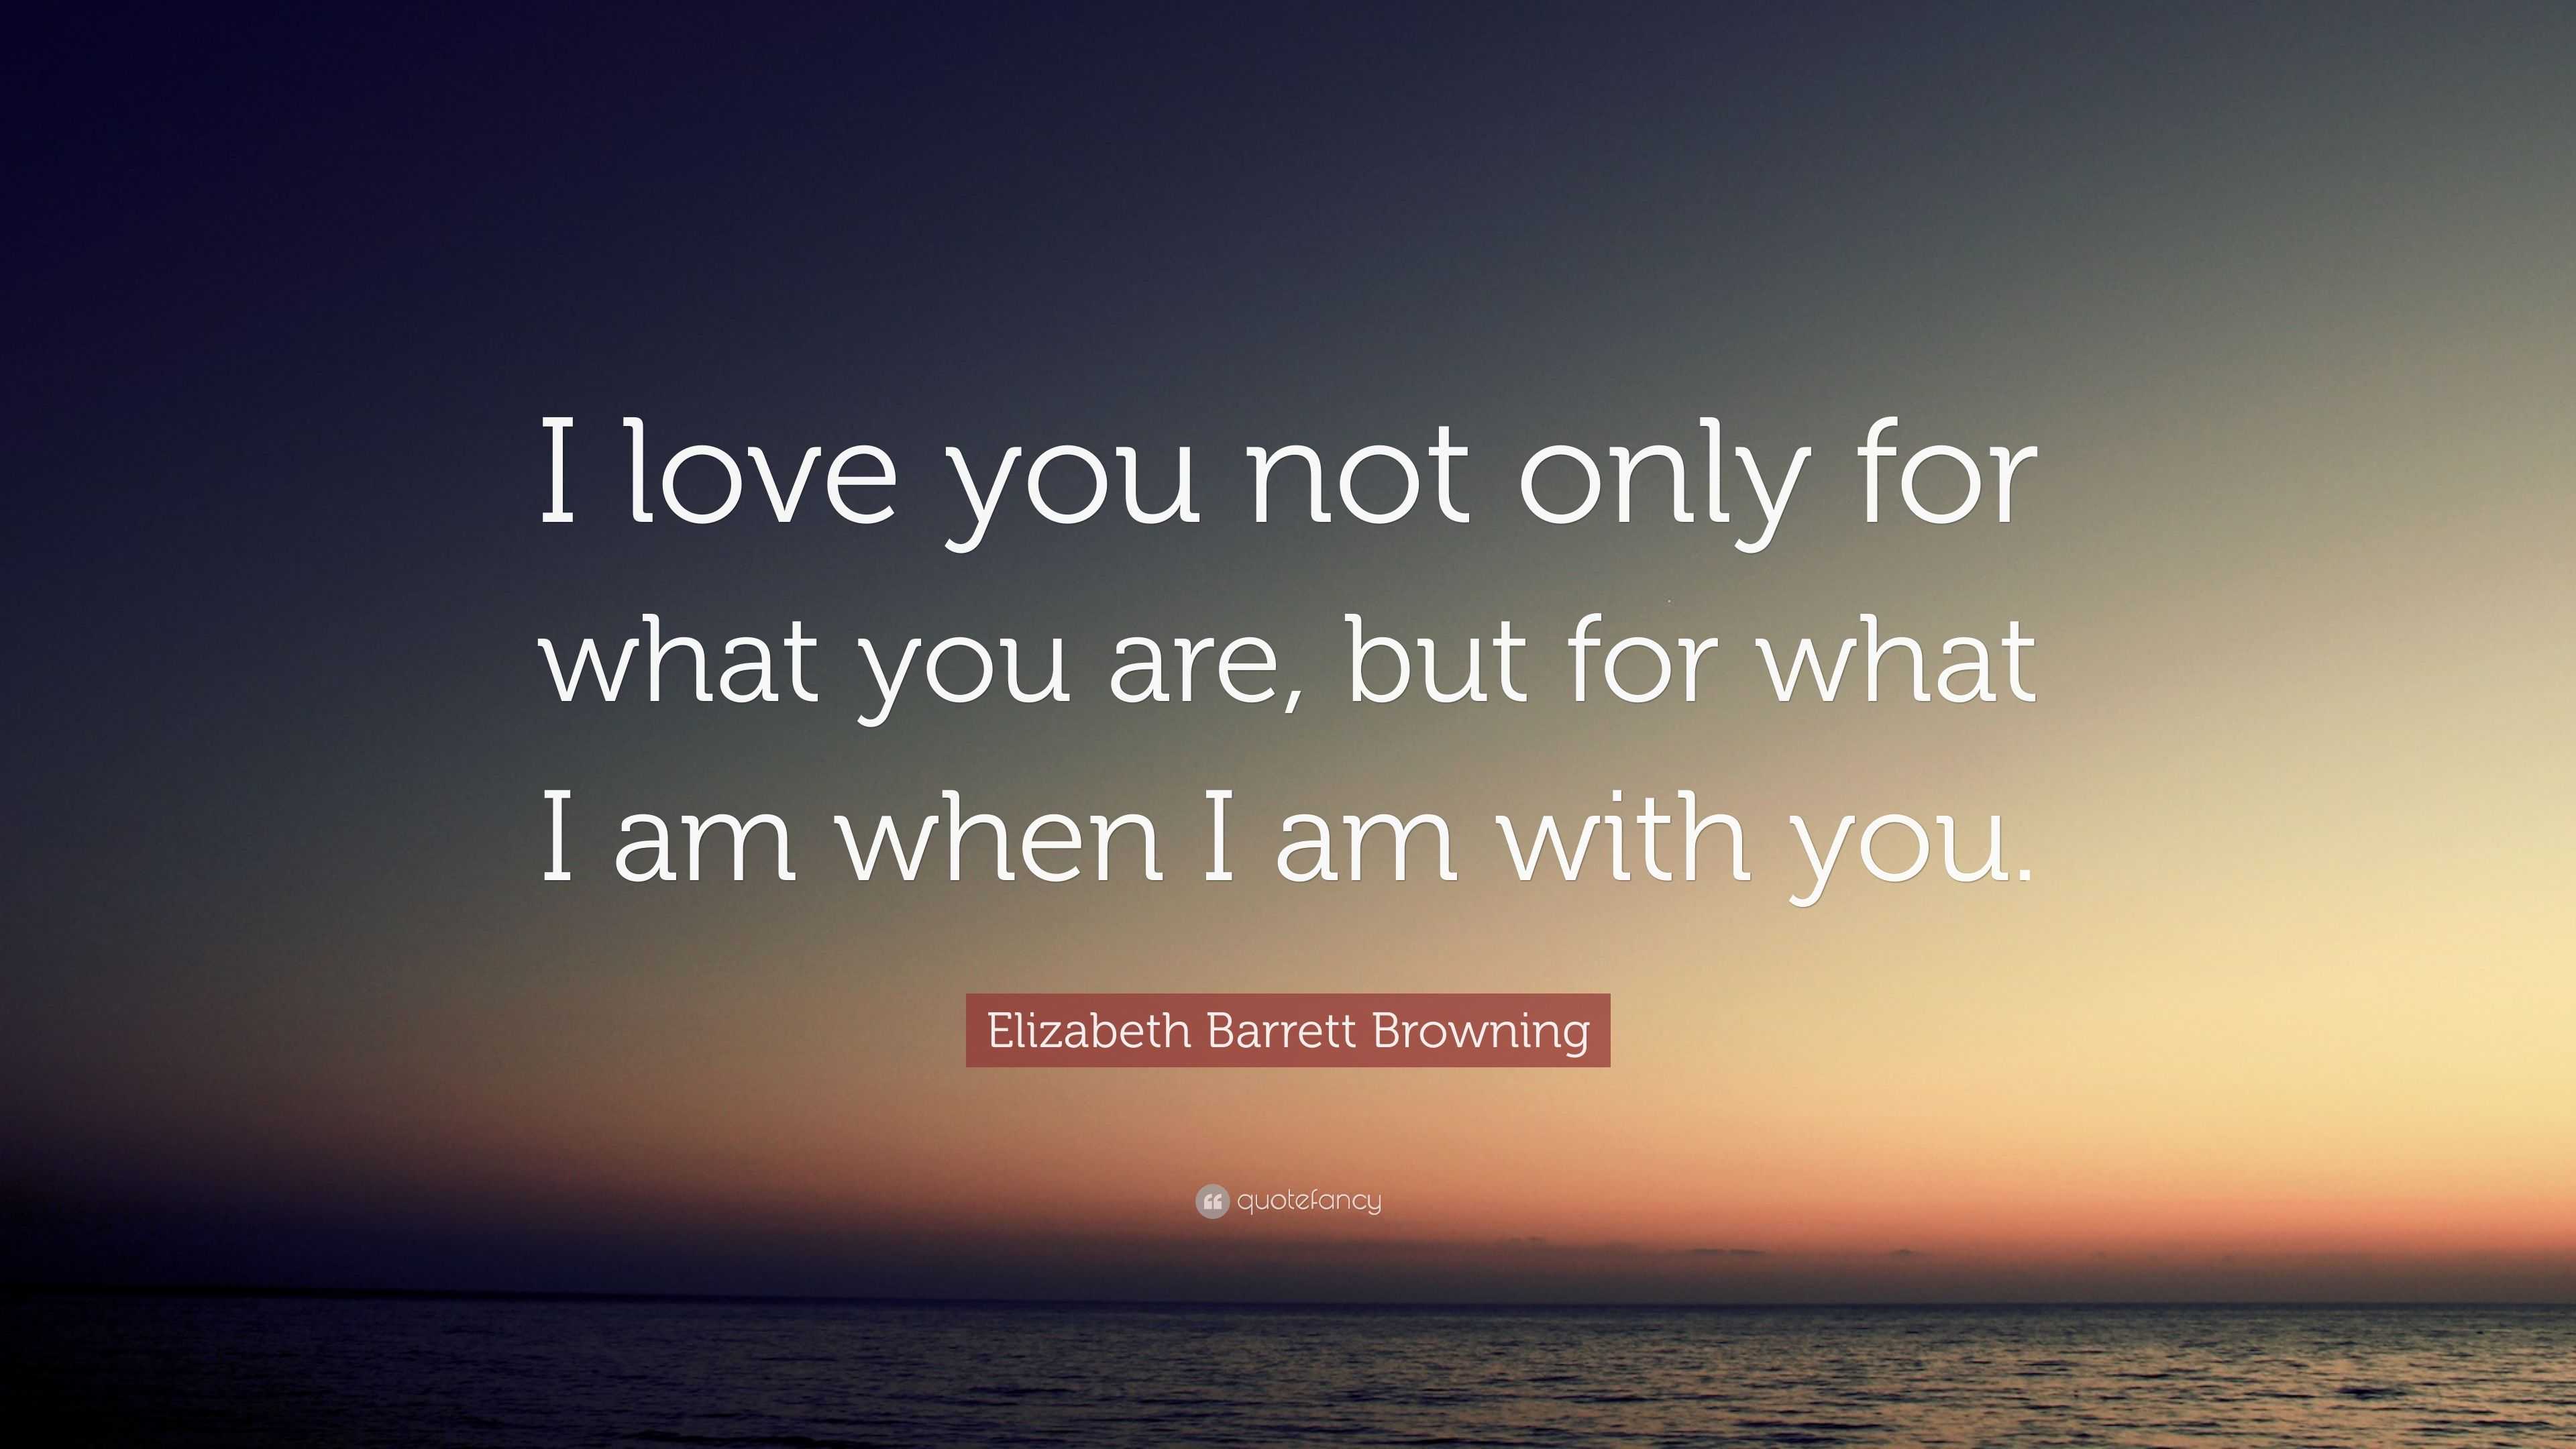 Elizabeth Barrett Browning Quote: “I love you not only for what you are ...